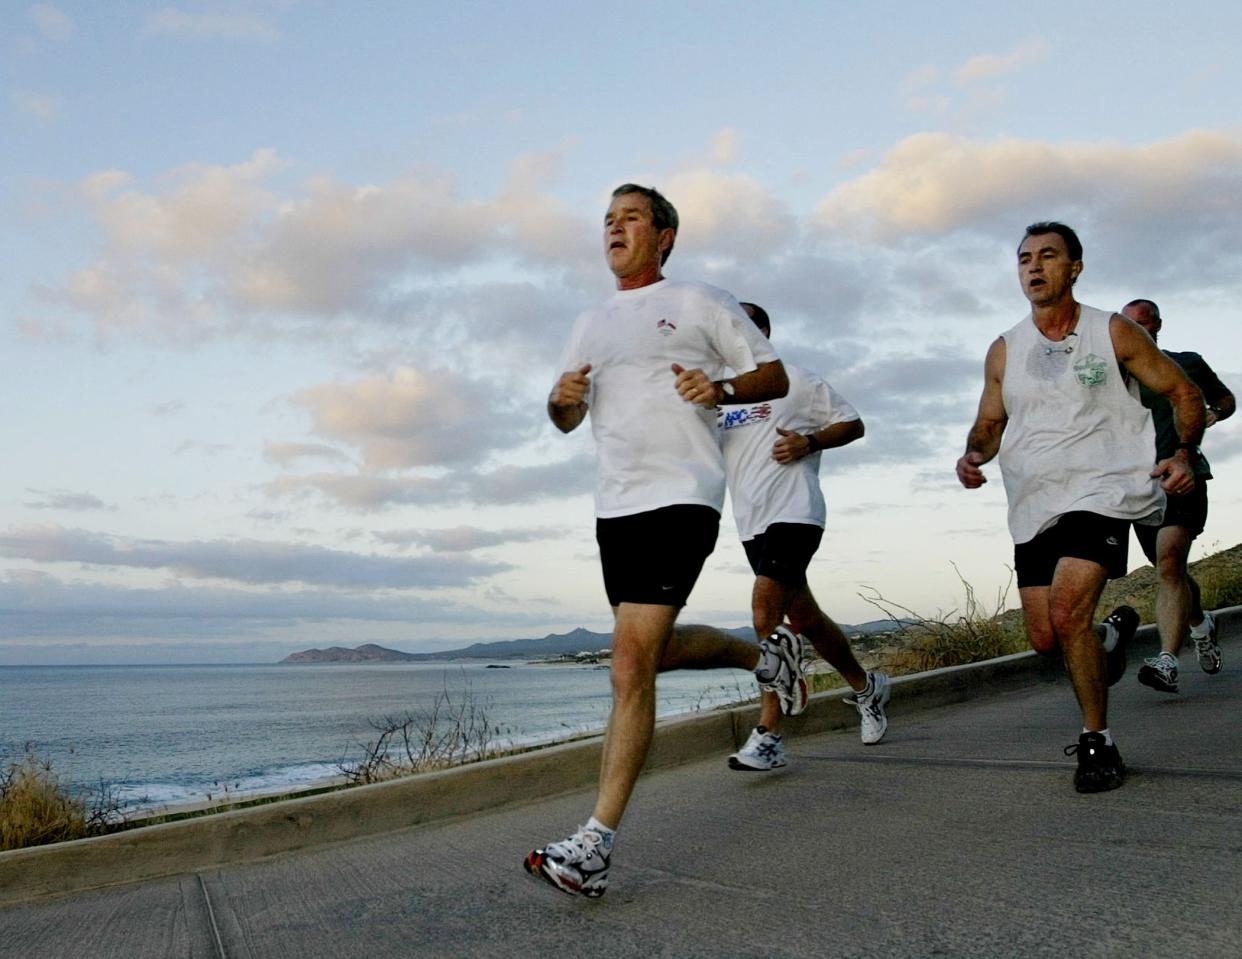 In 2002, then-President George W. Bush jogs with U.S. Secret Service agents during the APEC Leaders’ annual meetings in Los Cabos, Mexico. (Photo: Larry Downing/Reuters)